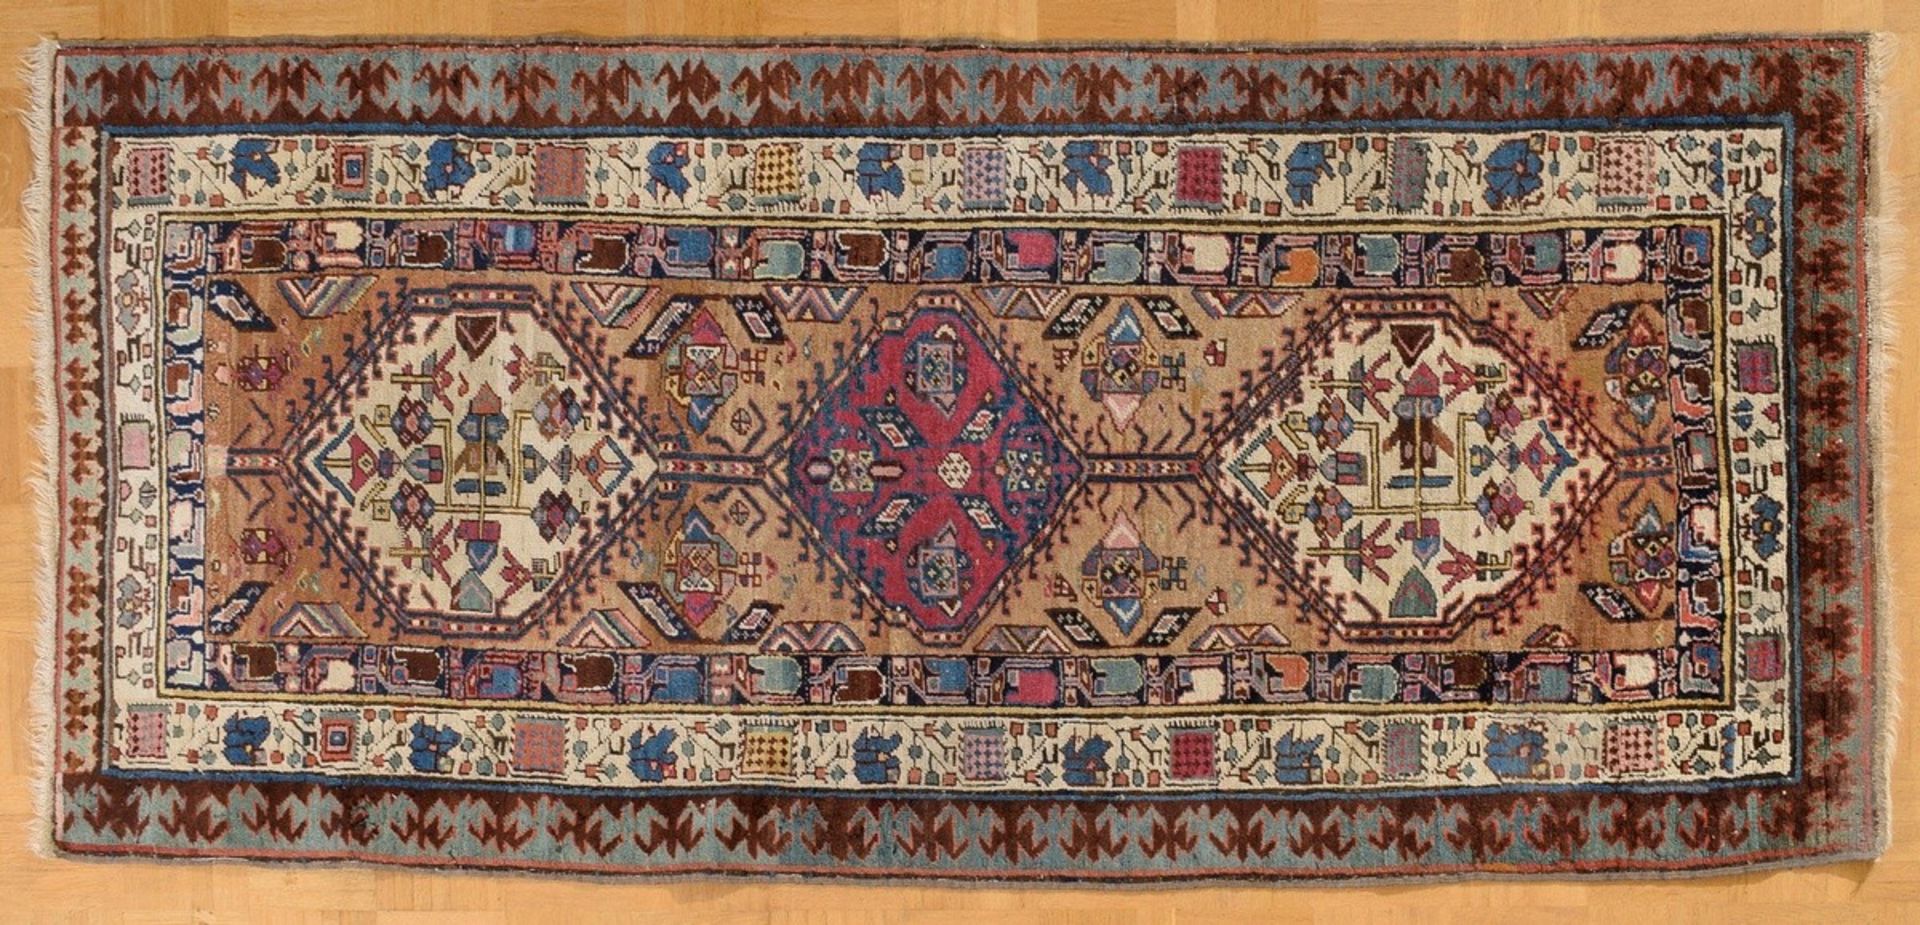 Serab carpet with a triple hexagonal-medallion and depictions of animals as well as a floral border